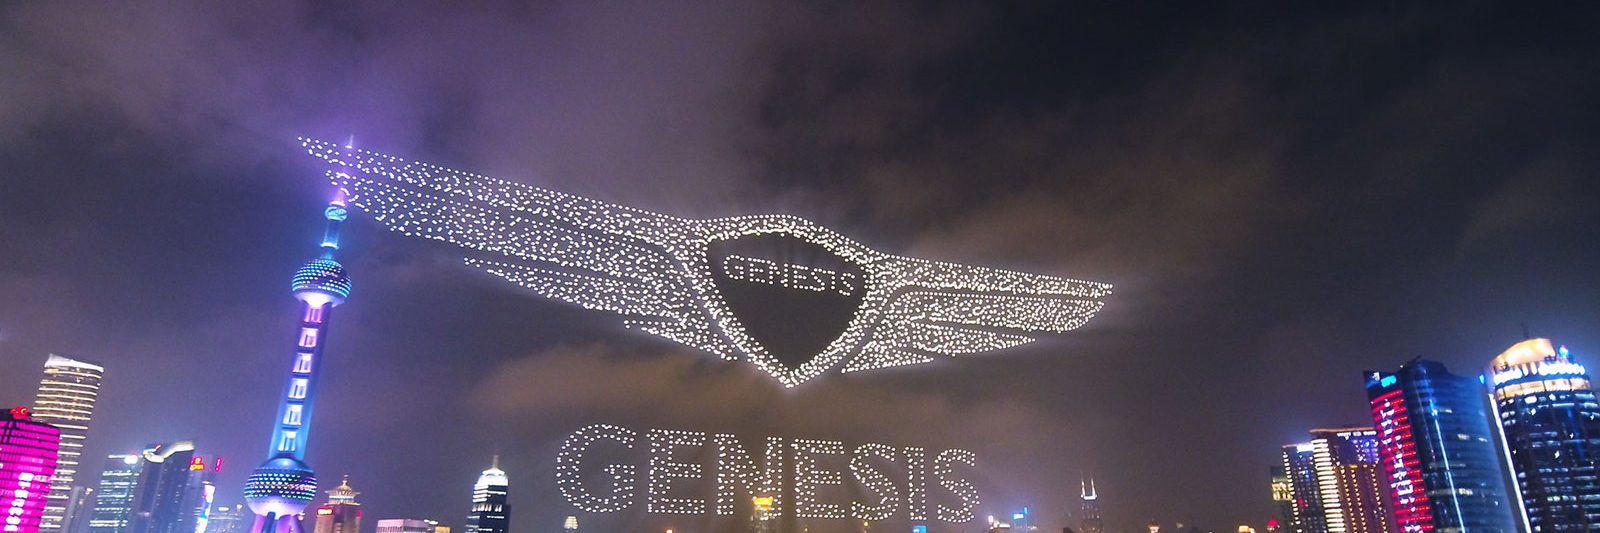 Genesis makes a new Guinness World Record for the most drones in the sky